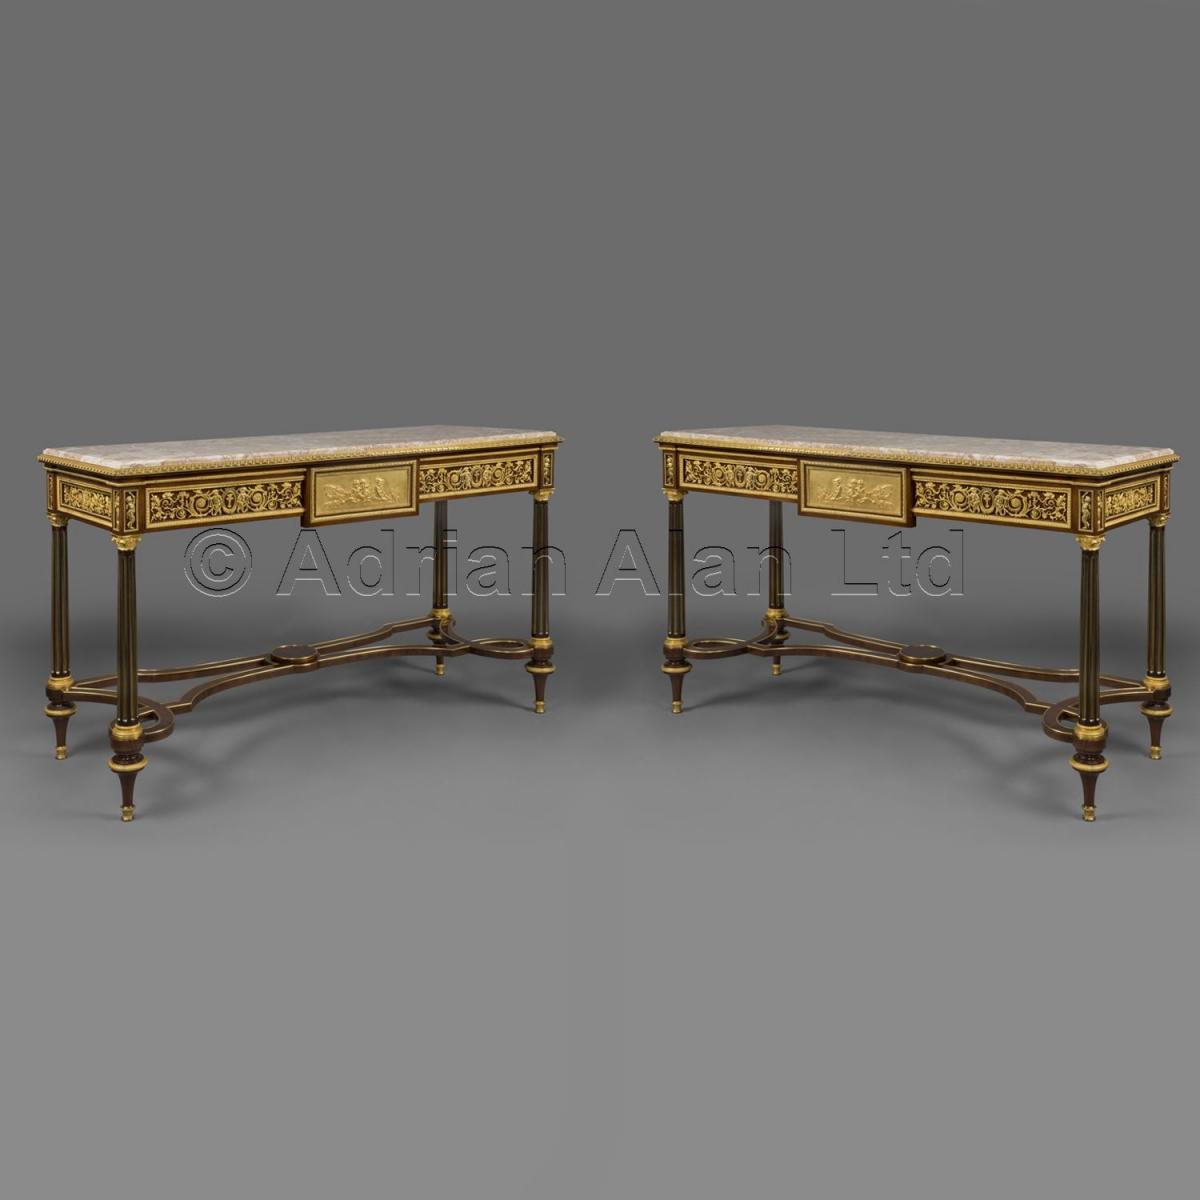 Pair of Console Tables ©AdrianAlanLtd